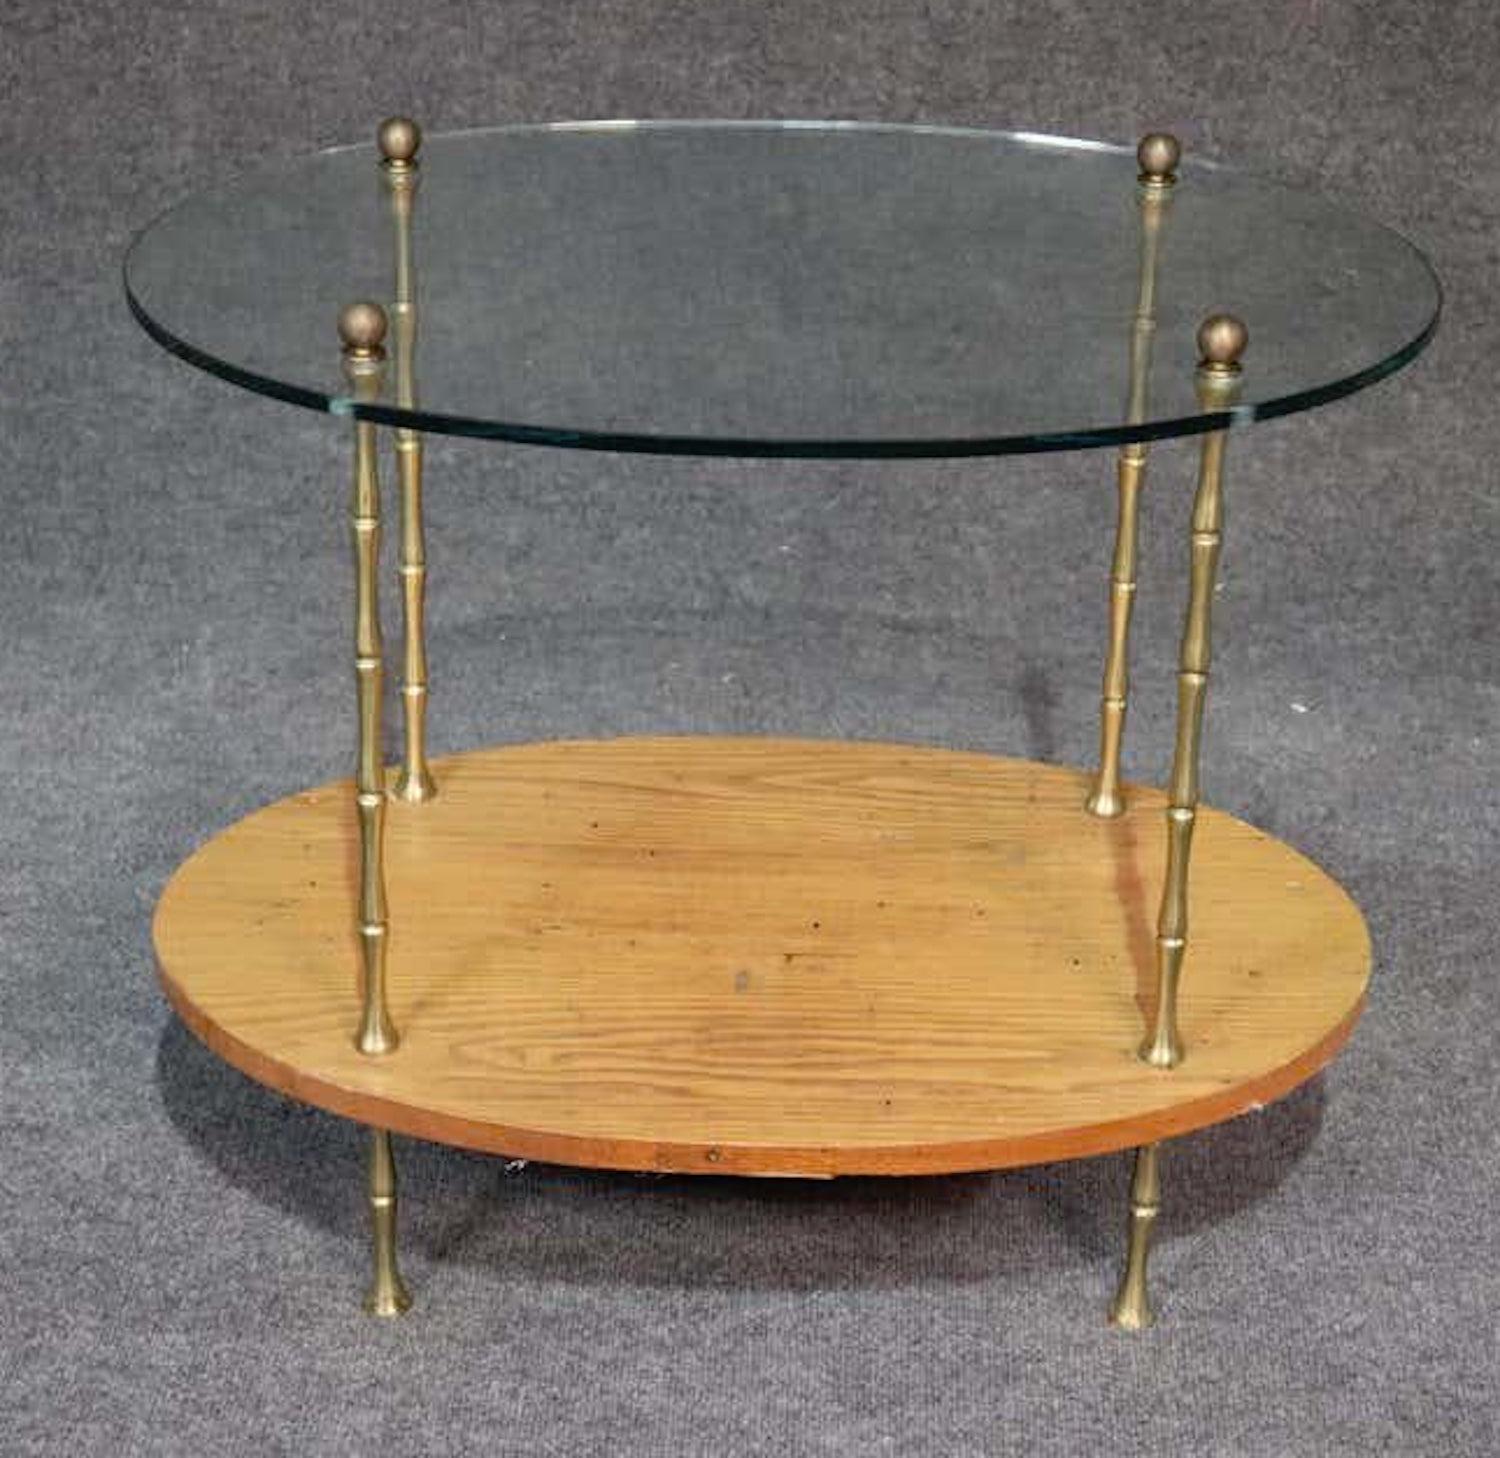 Vintage bamboo style tea cart with round glass shelves.
(Please confirm item location - NY or NJ - with dealer).
   